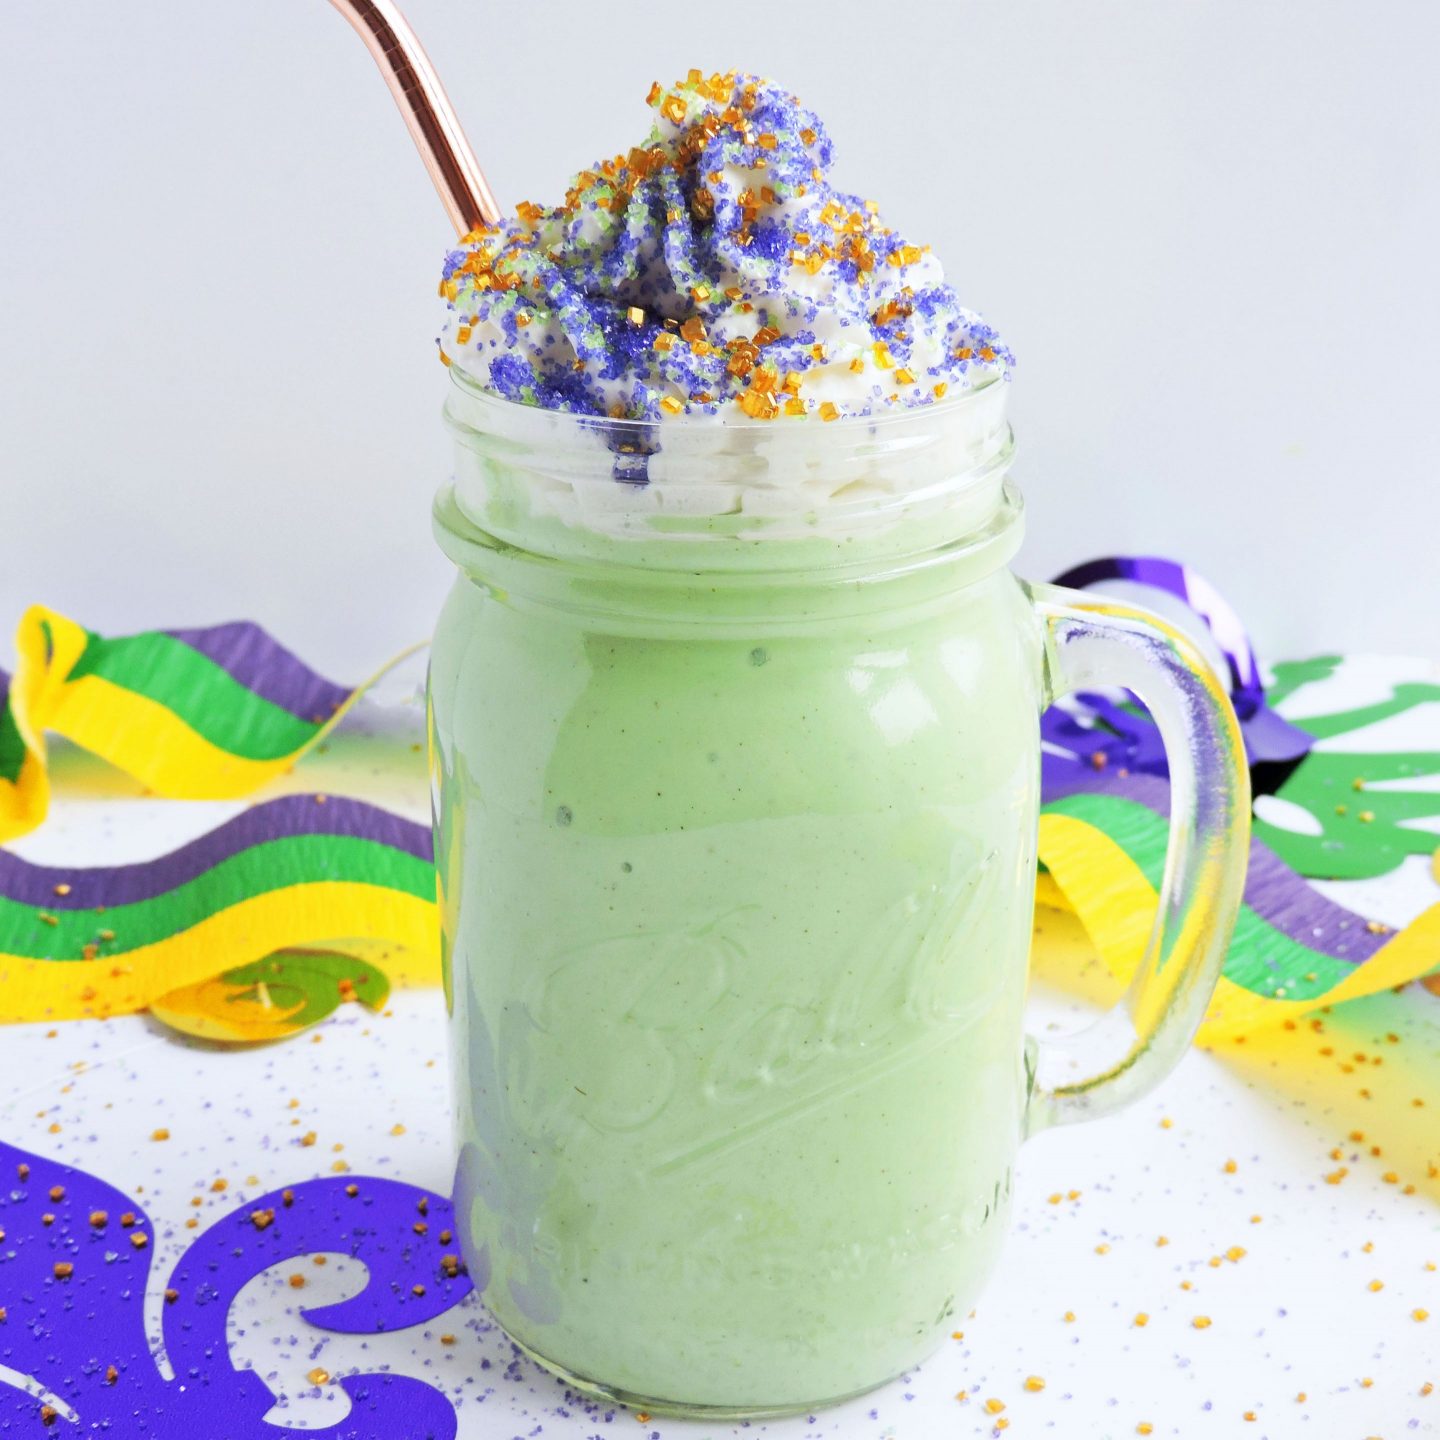 3 Delicious & Healthy Alternatives Inspired by King Cake